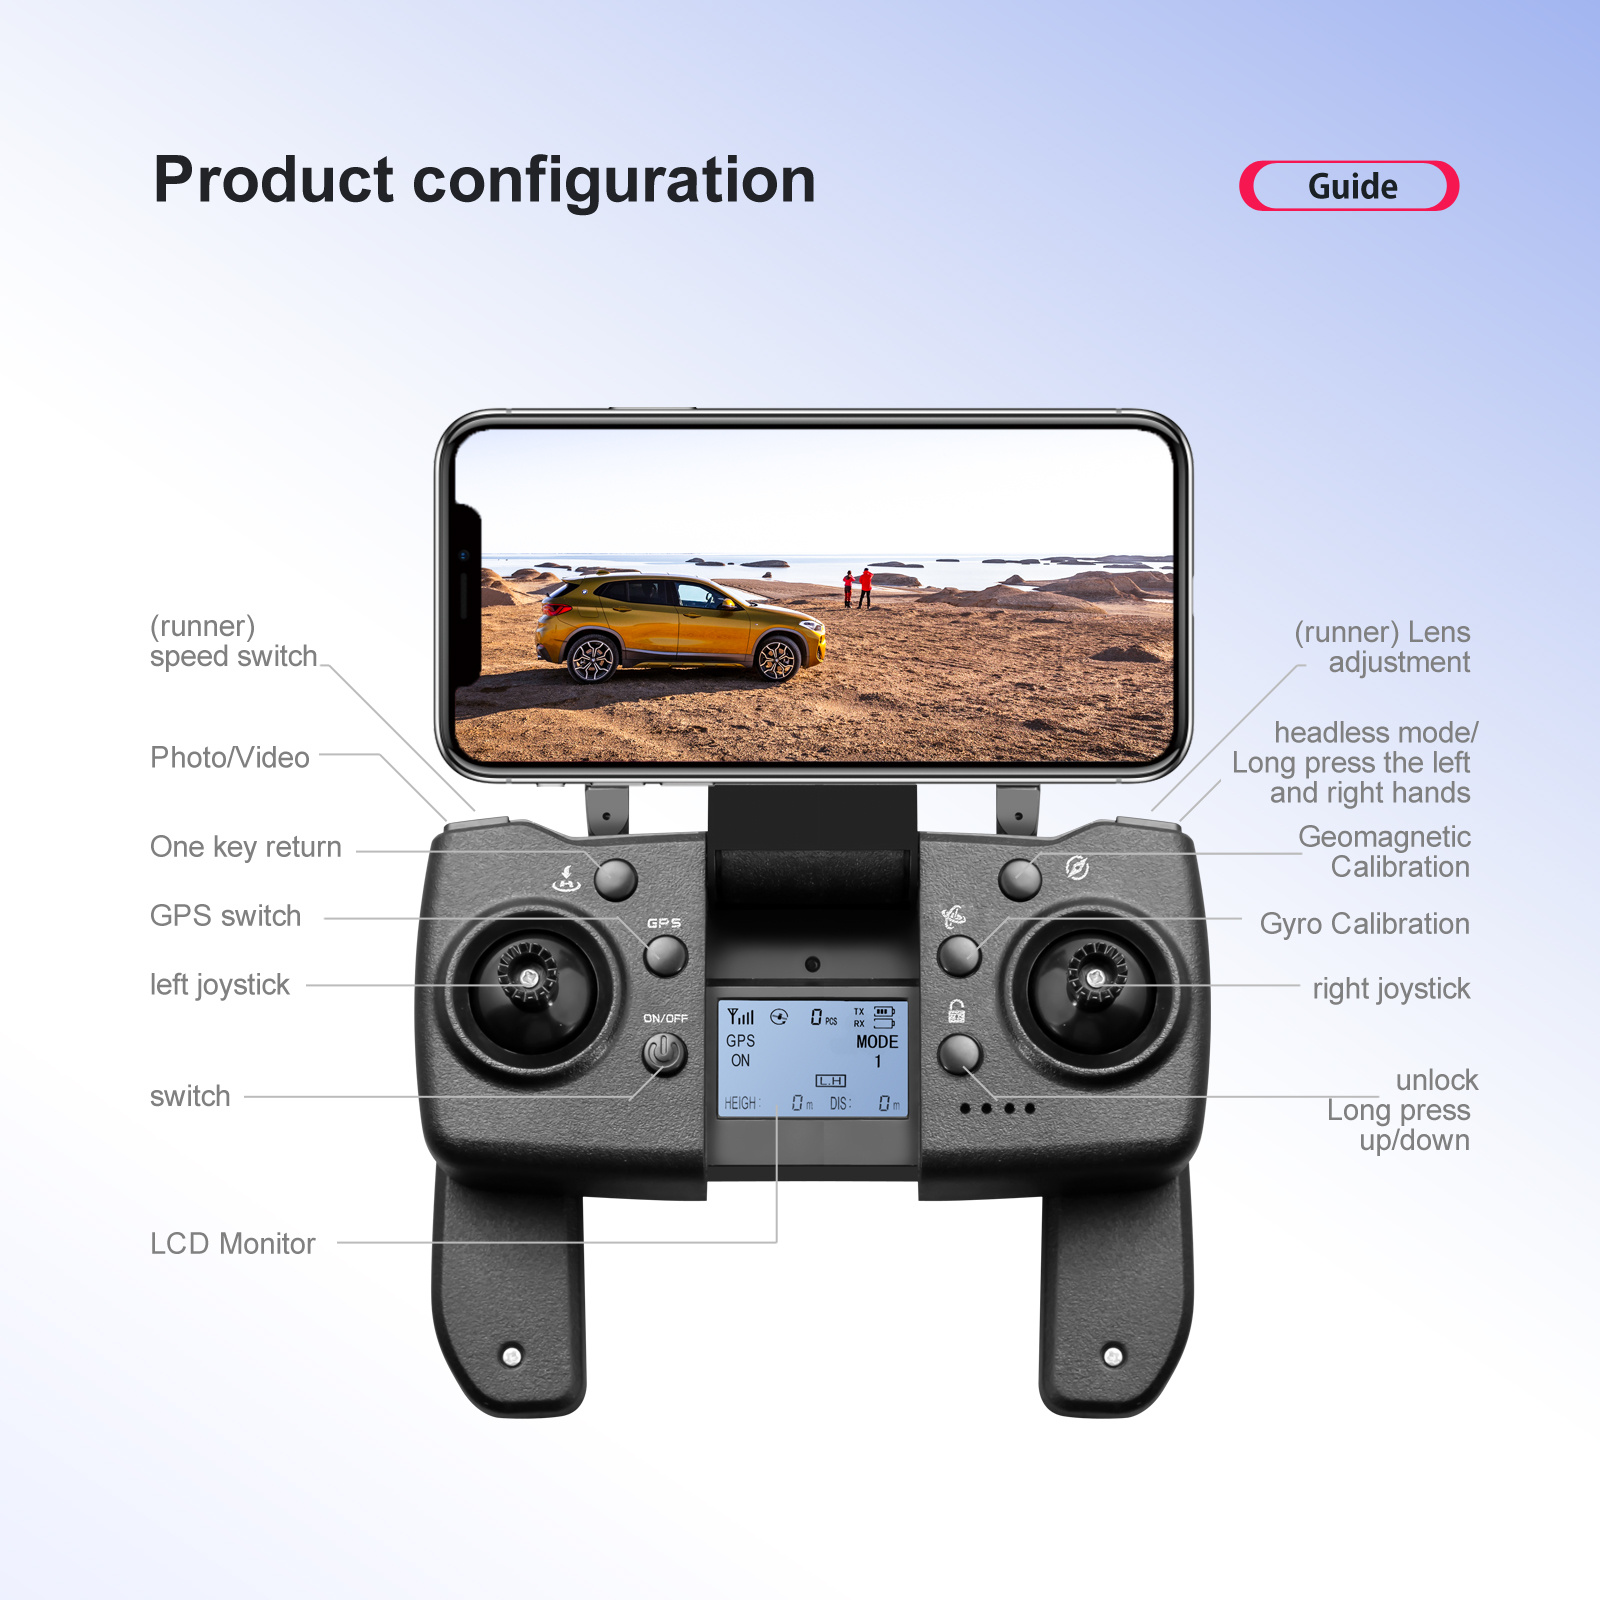 new s135 professional rc drone precise gps positioning powerful brushless motor with 1080p electric gimbal camera on three axis lcd display real time 5g signal transmission perfect toy gift teenager stuff uav quadcopter details 11